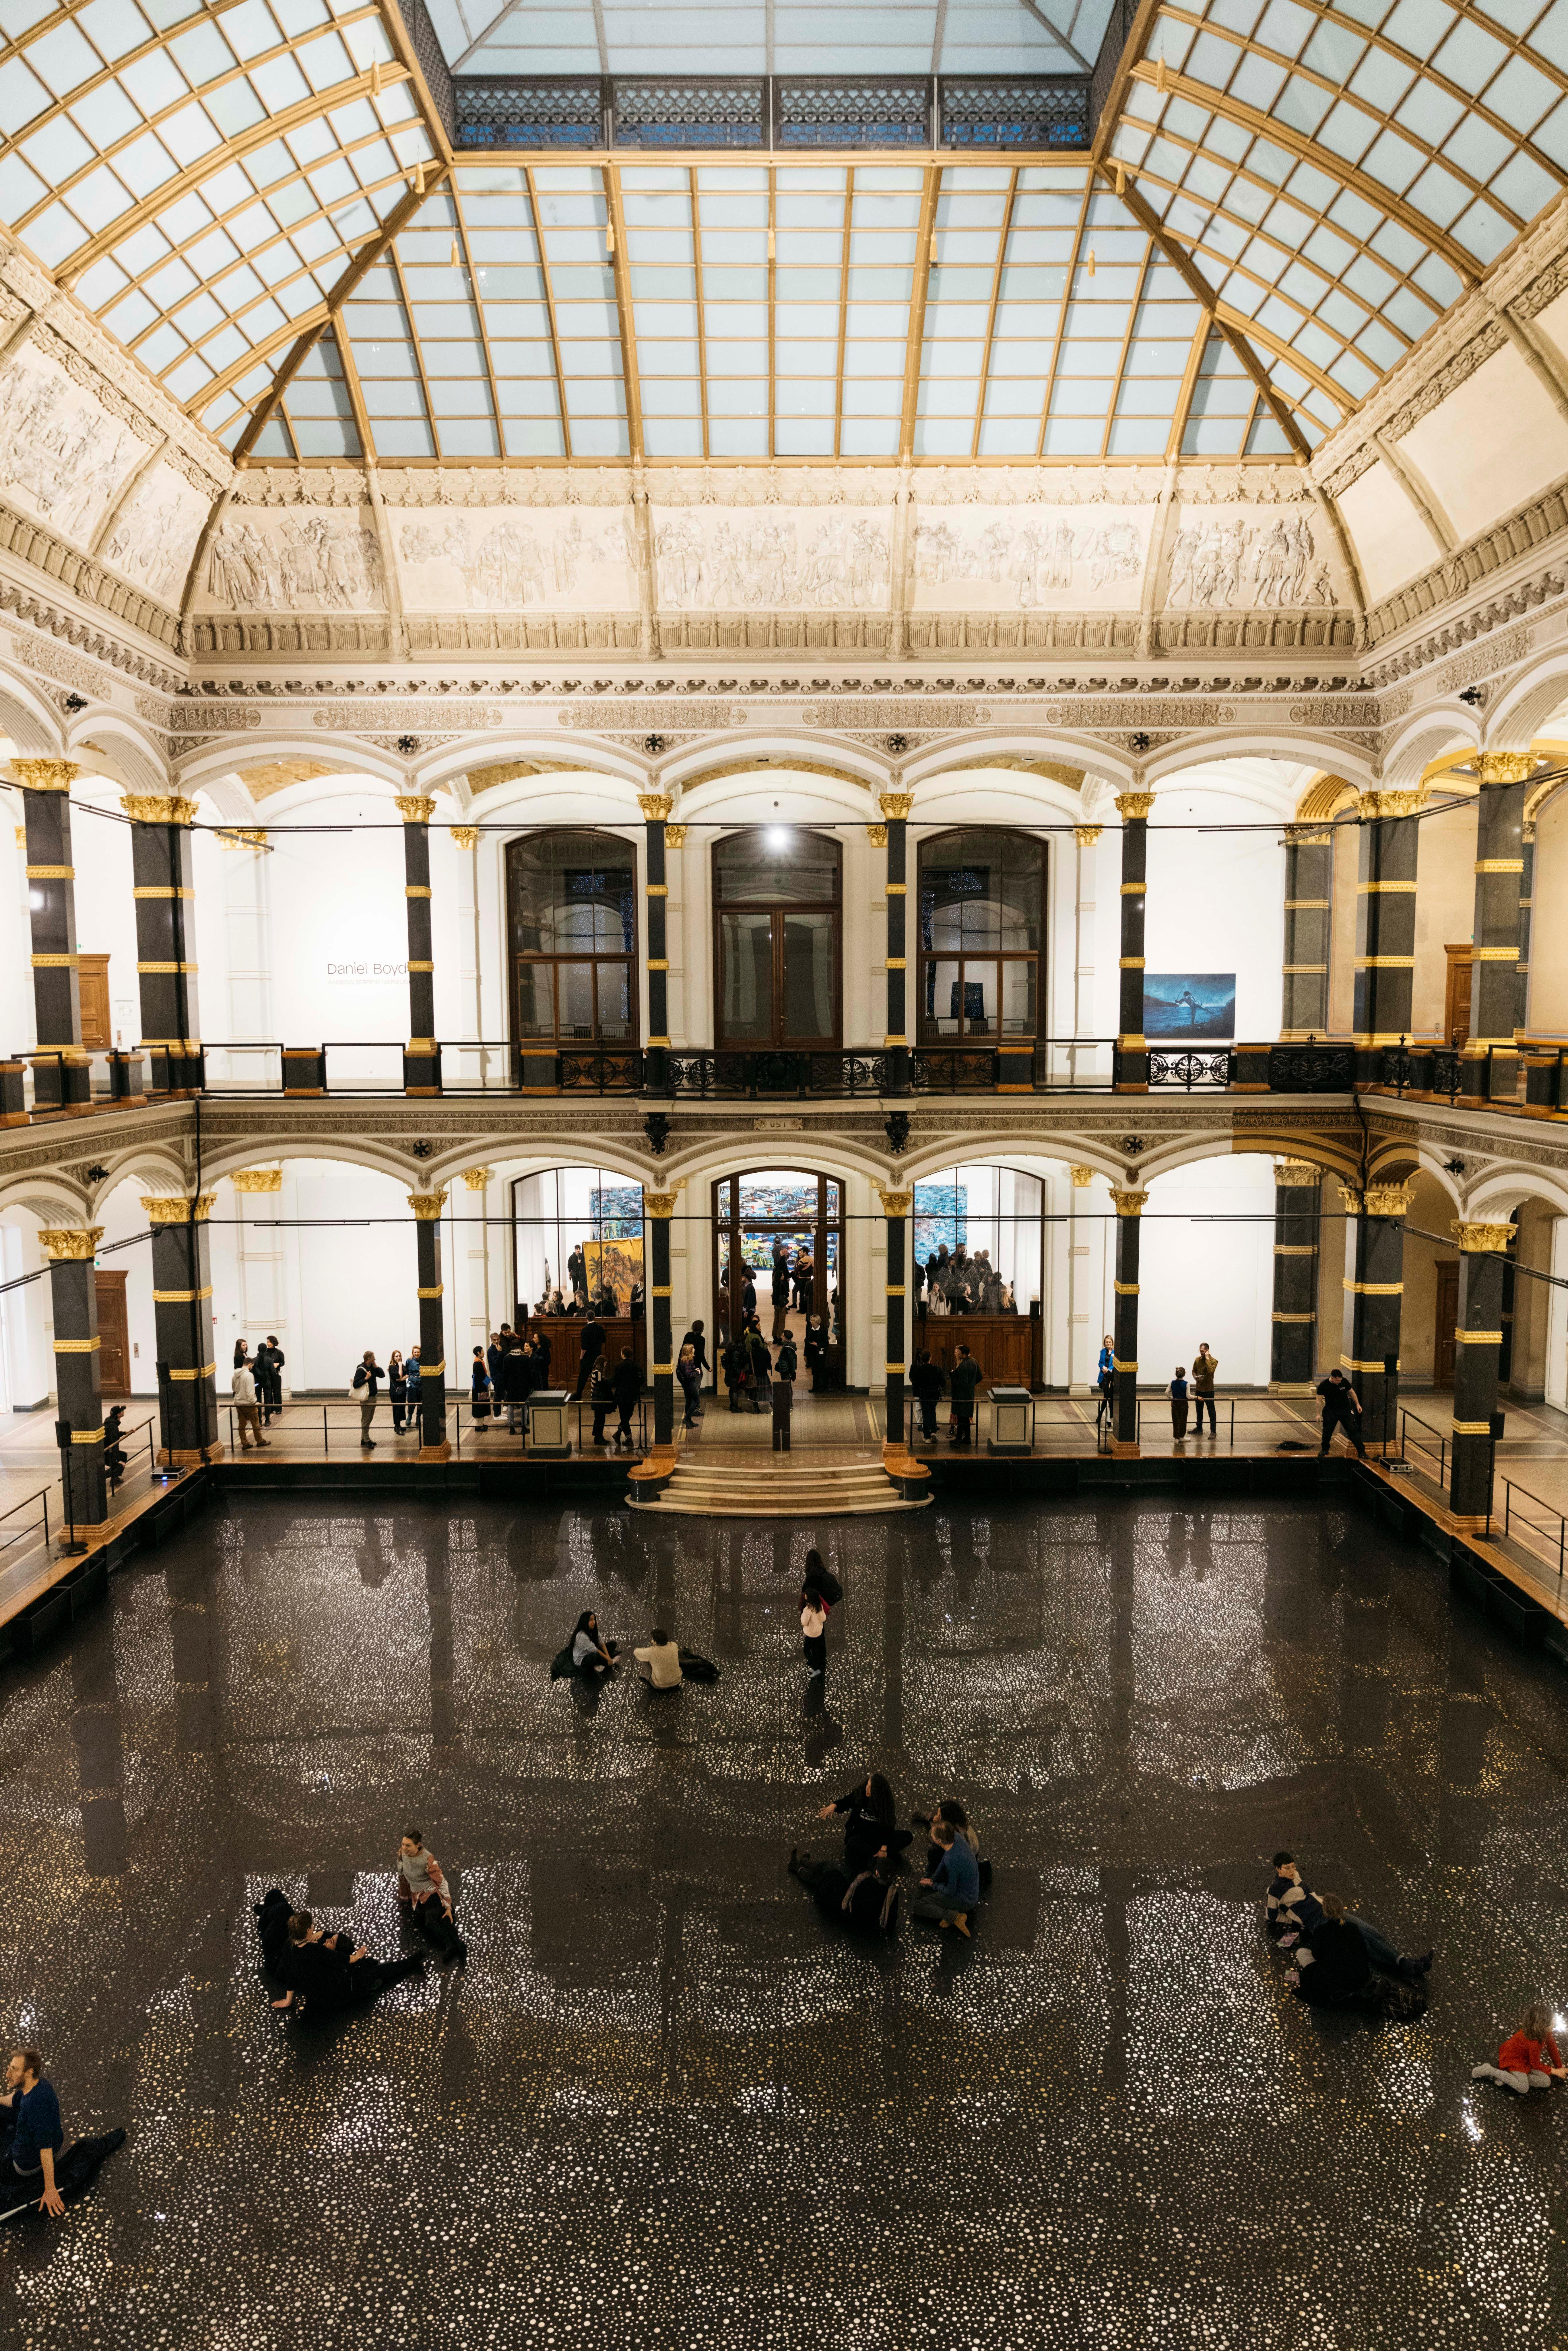 The atrium of the Gropius Bau. The floor is covered with a reflective foil as part of the Daniel Boyd's exhibition "RAINBOW SERPENT (VERSION)".